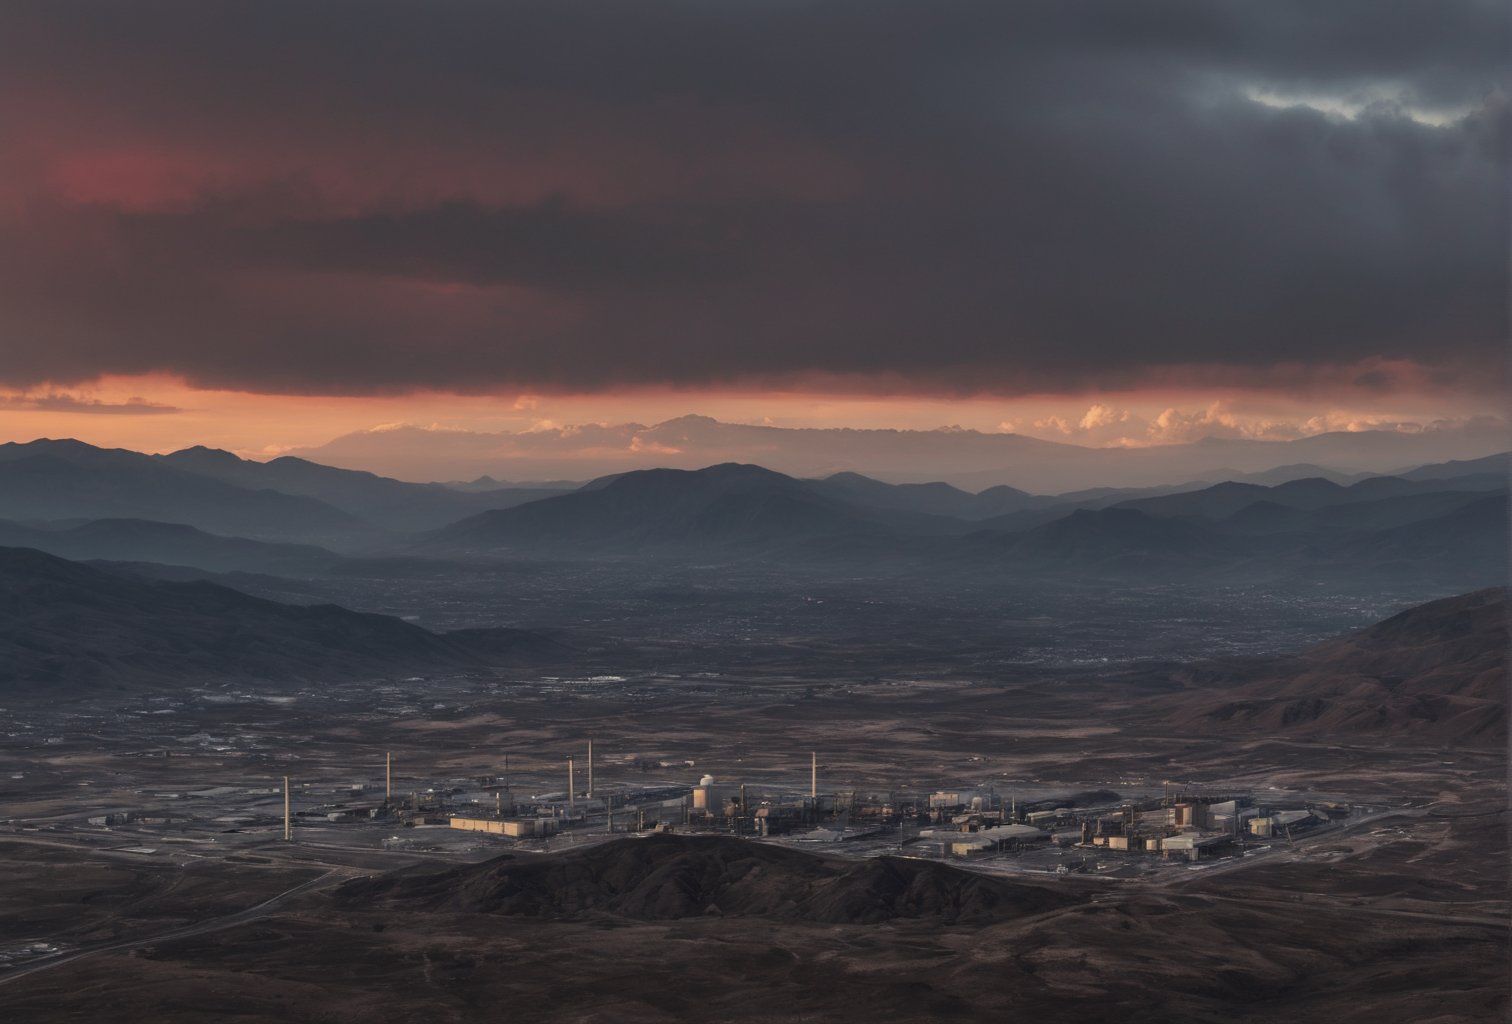 The image depicts a dramatic and industrial landscape. A thick layer of gray clouds dominates the sky, illuminated in a deep red hue from above. Amidst the clouds, a small golden sun peeks out, adding a touch of warmth to the otherwise gloomy atmosphere. In the distance, on the horizon, a range of gray mountains stretches across the landscape. Among these mountains, power plants and industrial buildings can be seen, their structures blending into the rugged terrain. Closer to the foreground, the mountains take on a darker tone, gradually transitioning to black mountains that loom in the distance. These black mountains are also dotted with power plants and industrial buildings, casting long shadows in the fading light.